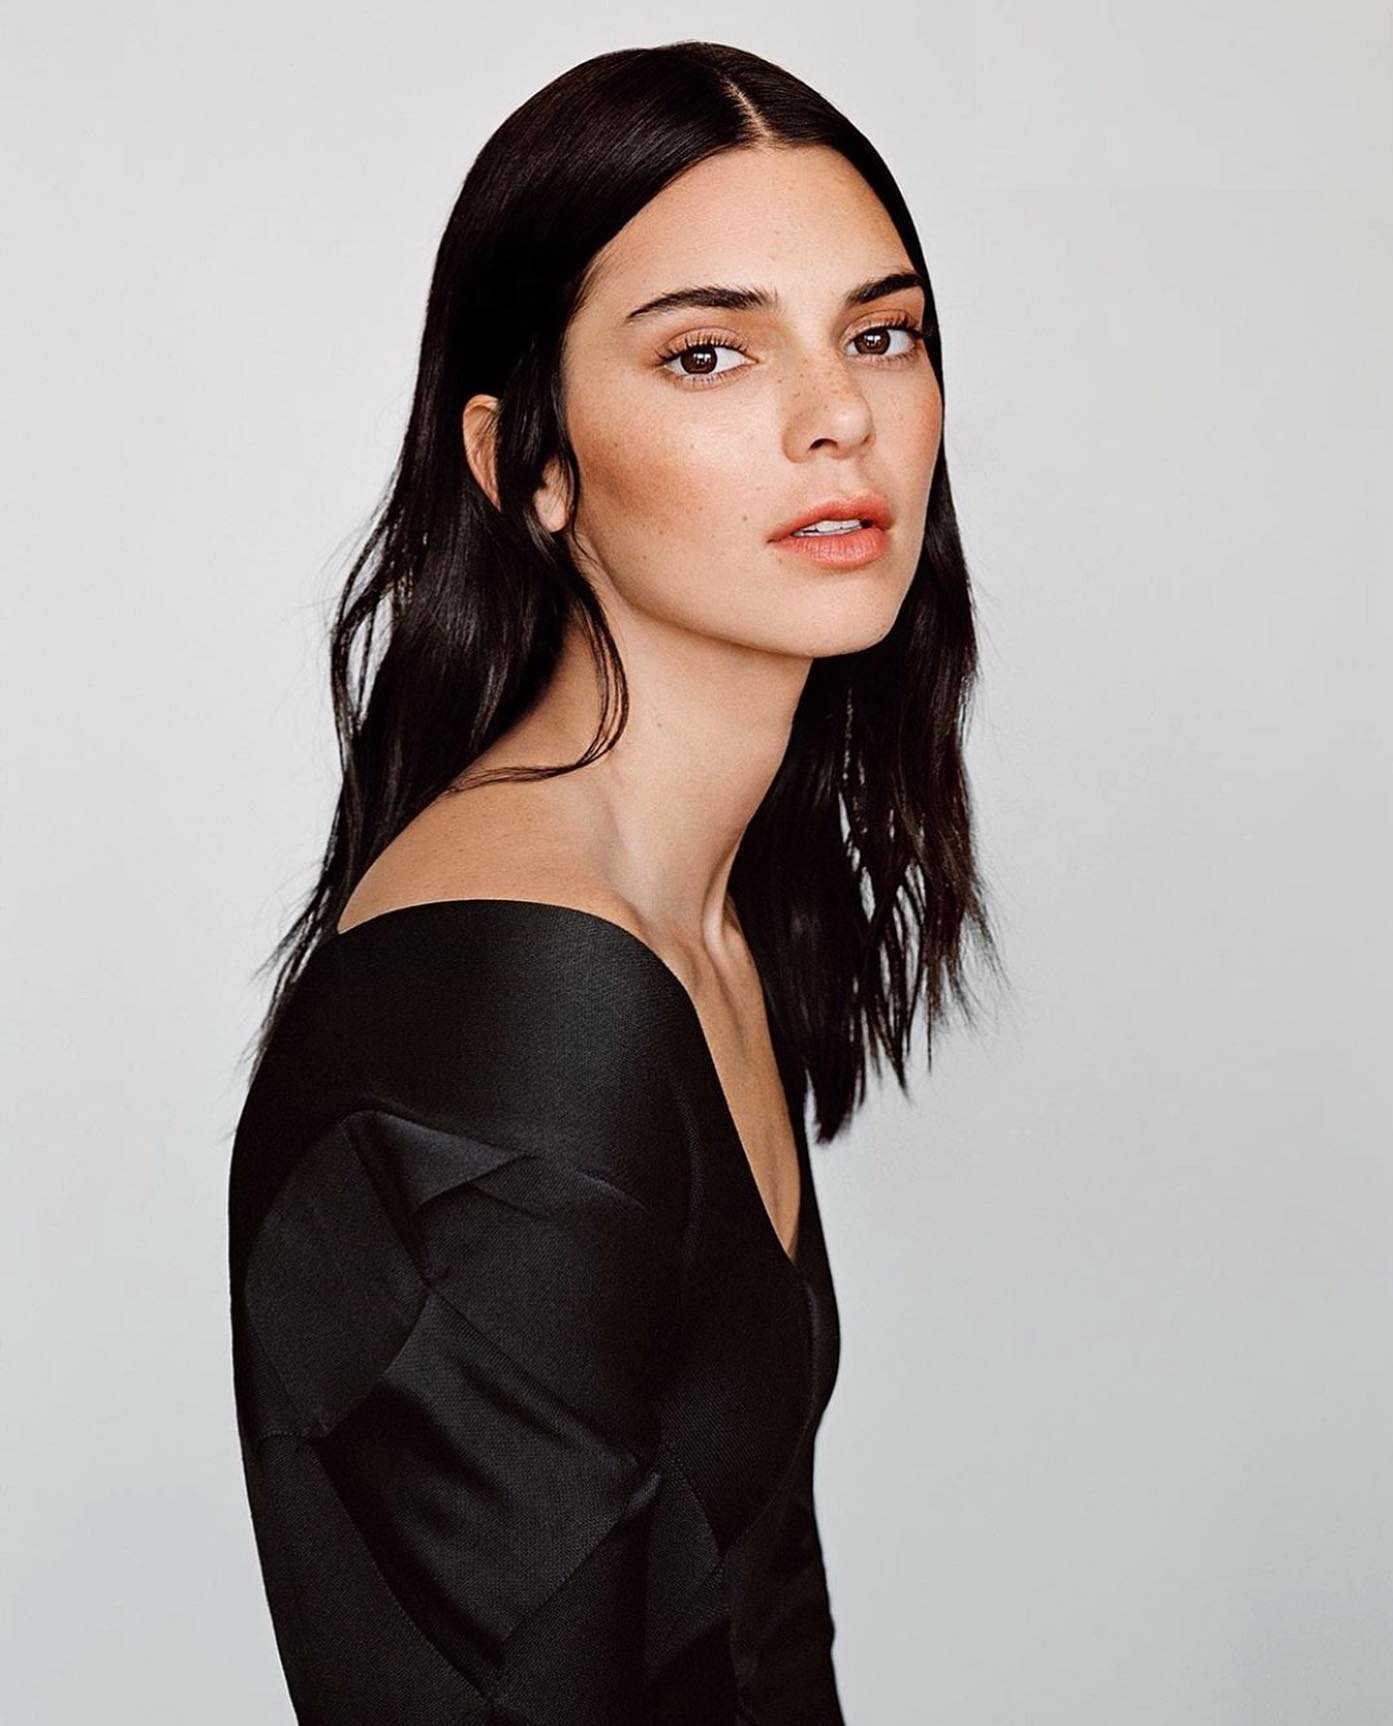 Kendall Jenner Images